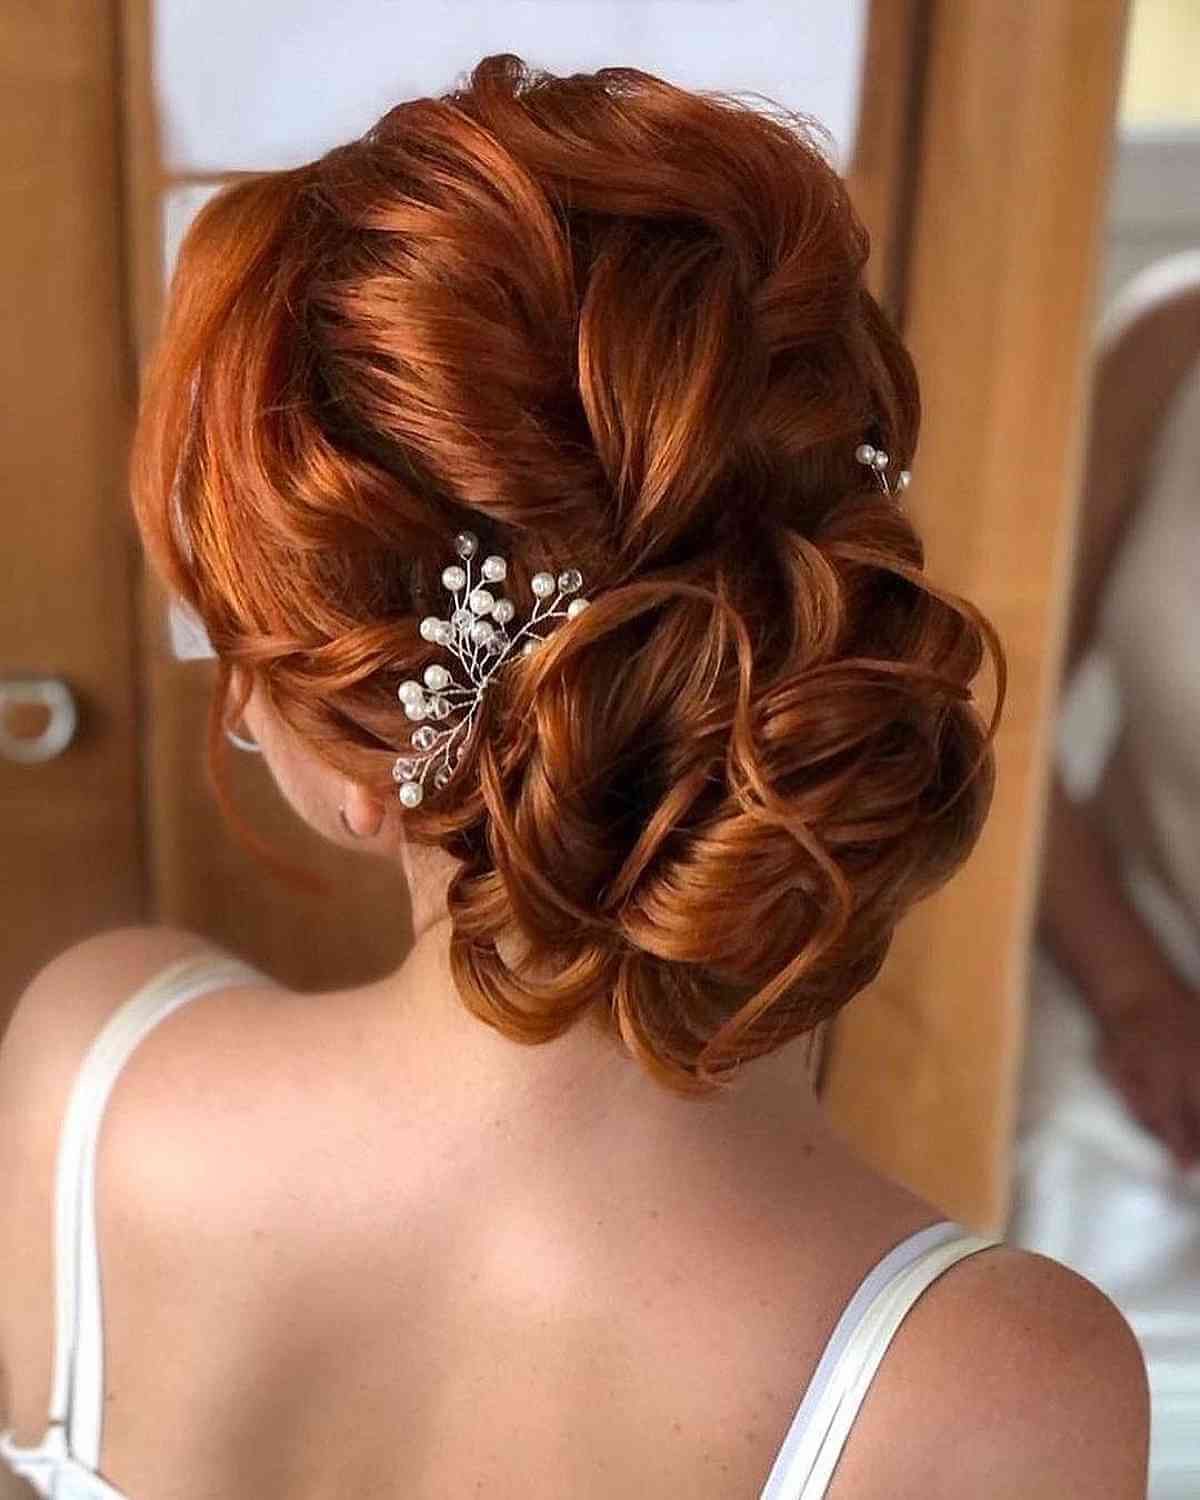 39 Breathtaking Loose Updos That Are Trendy For 2023 Intended For Fancy Loose Low Updo (View 6 of 25)